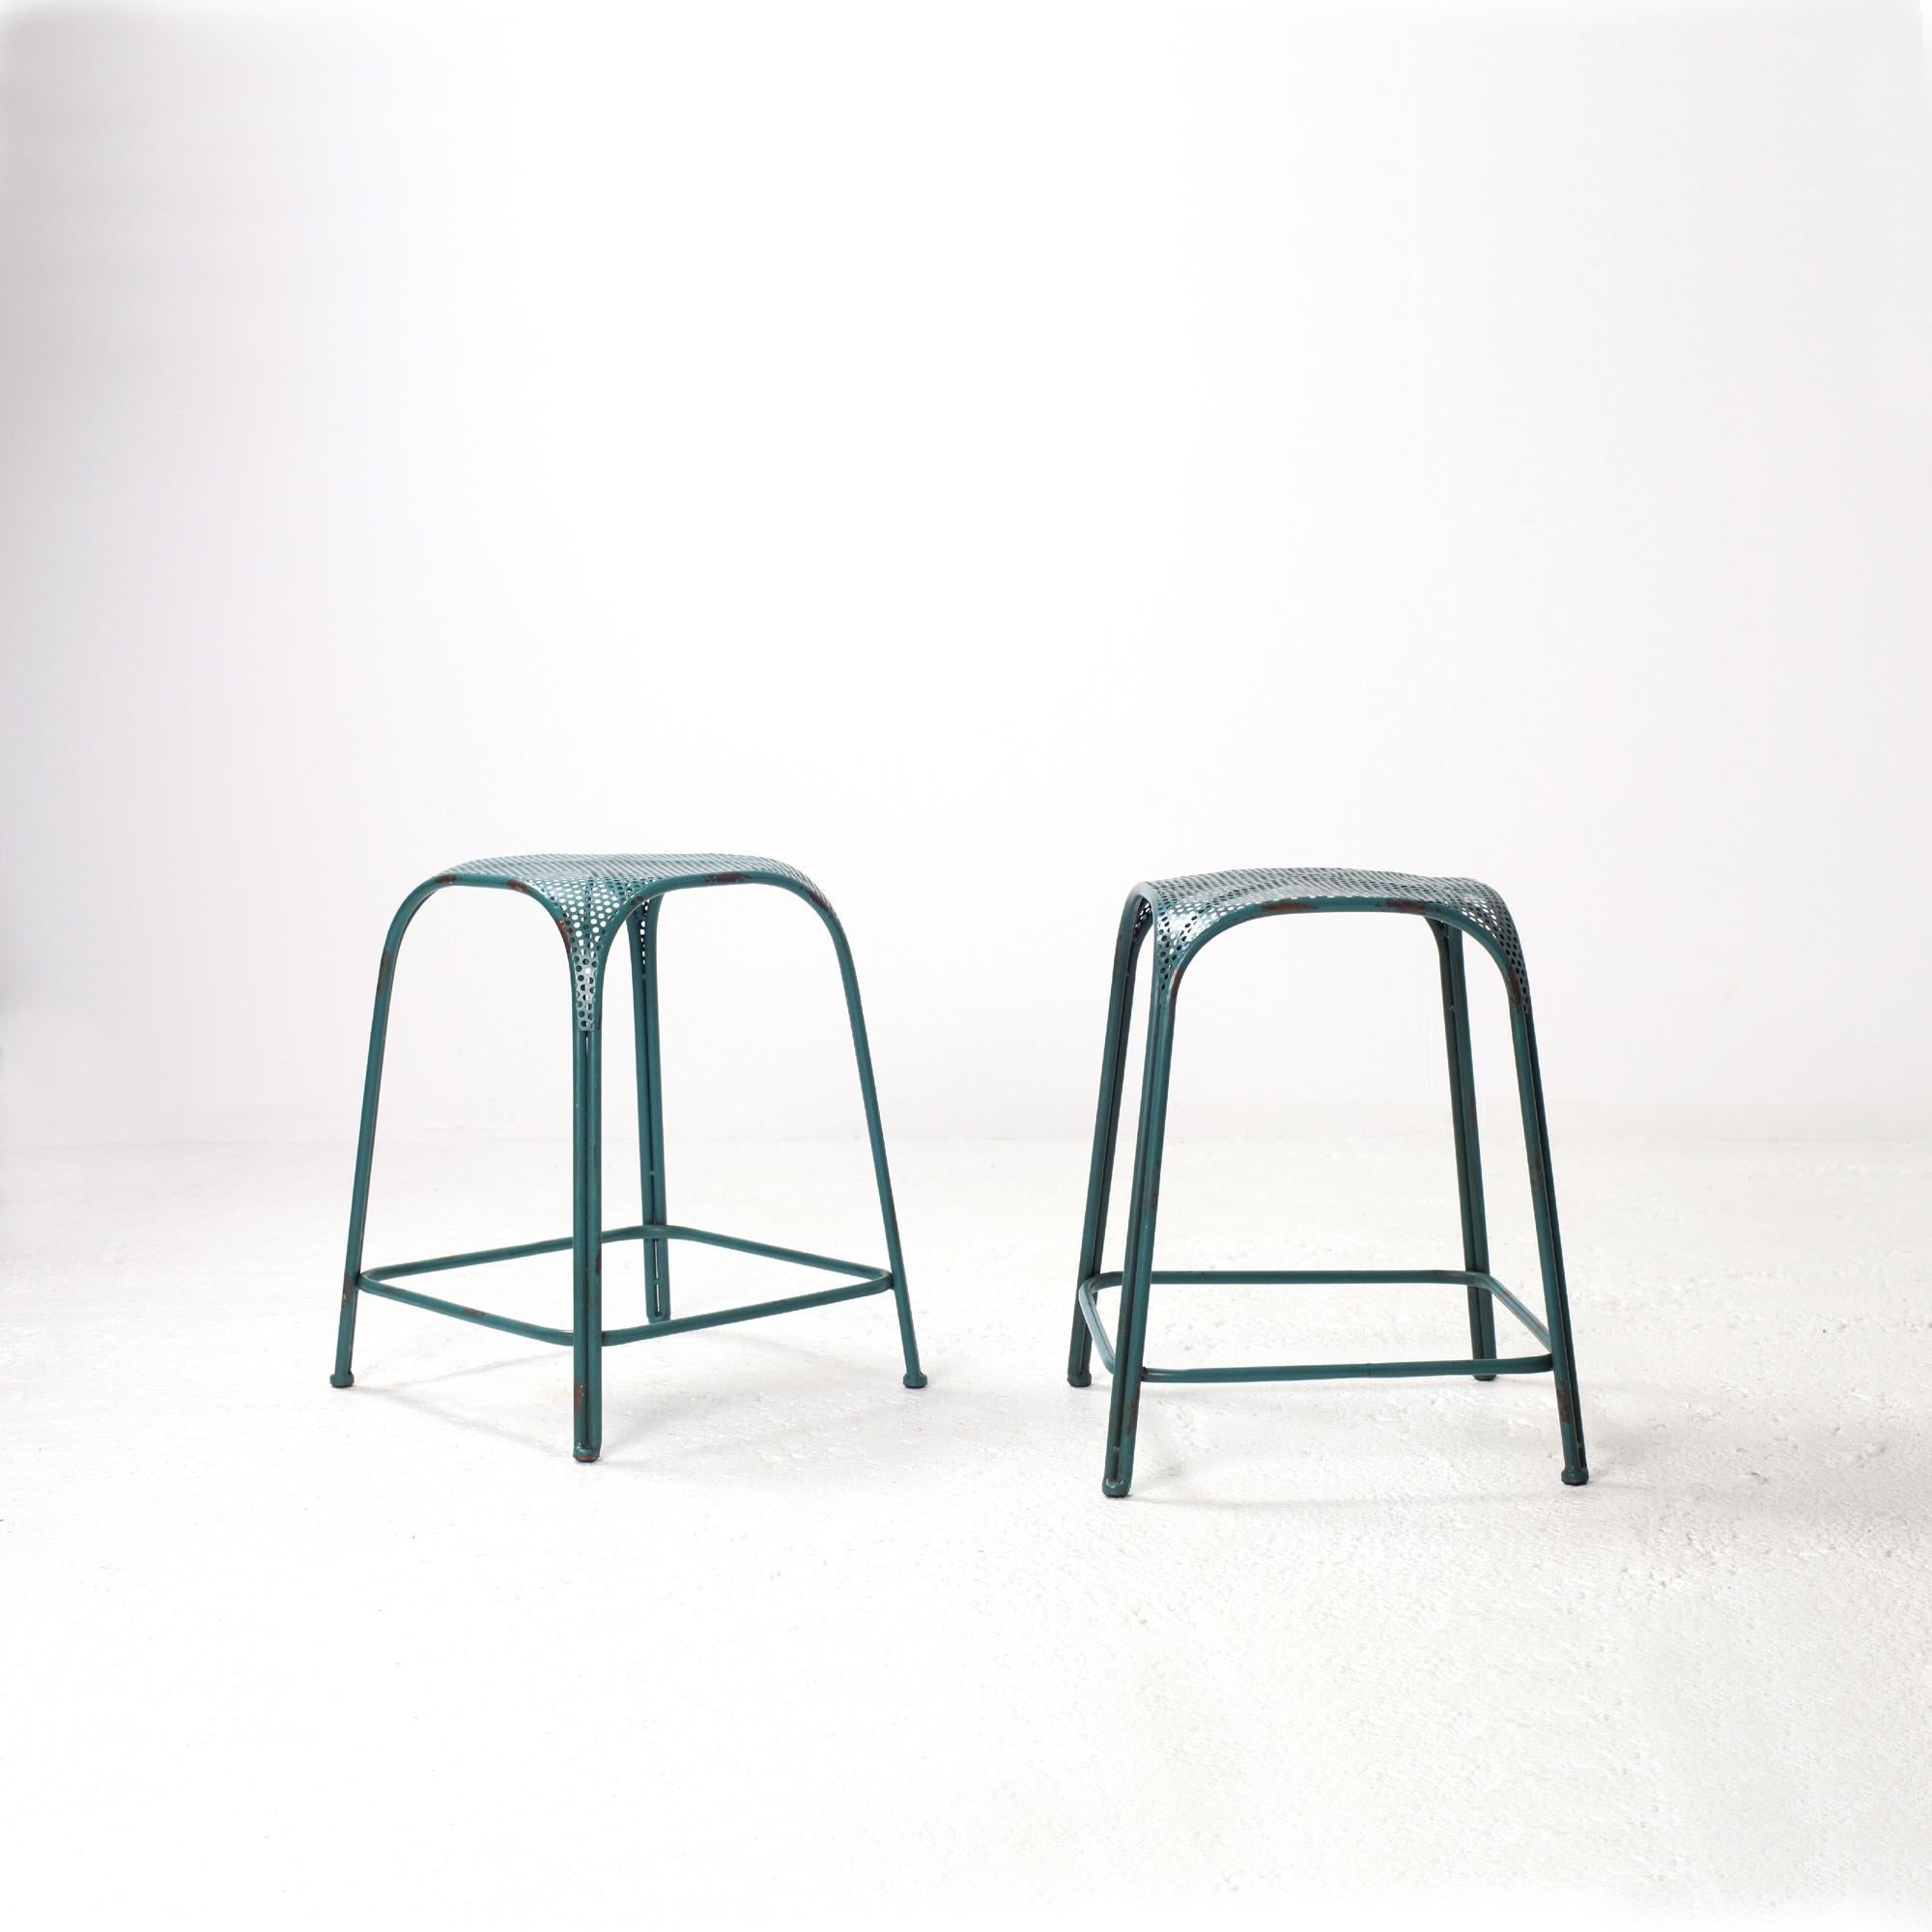 Pair of green laquered steel Italian Stool from the 1960s
Very elegant shape in the style of Mathieu Mategot with perforated steel sheet seat and tubular steel structure.
Good Vintage condition with nice patina. 